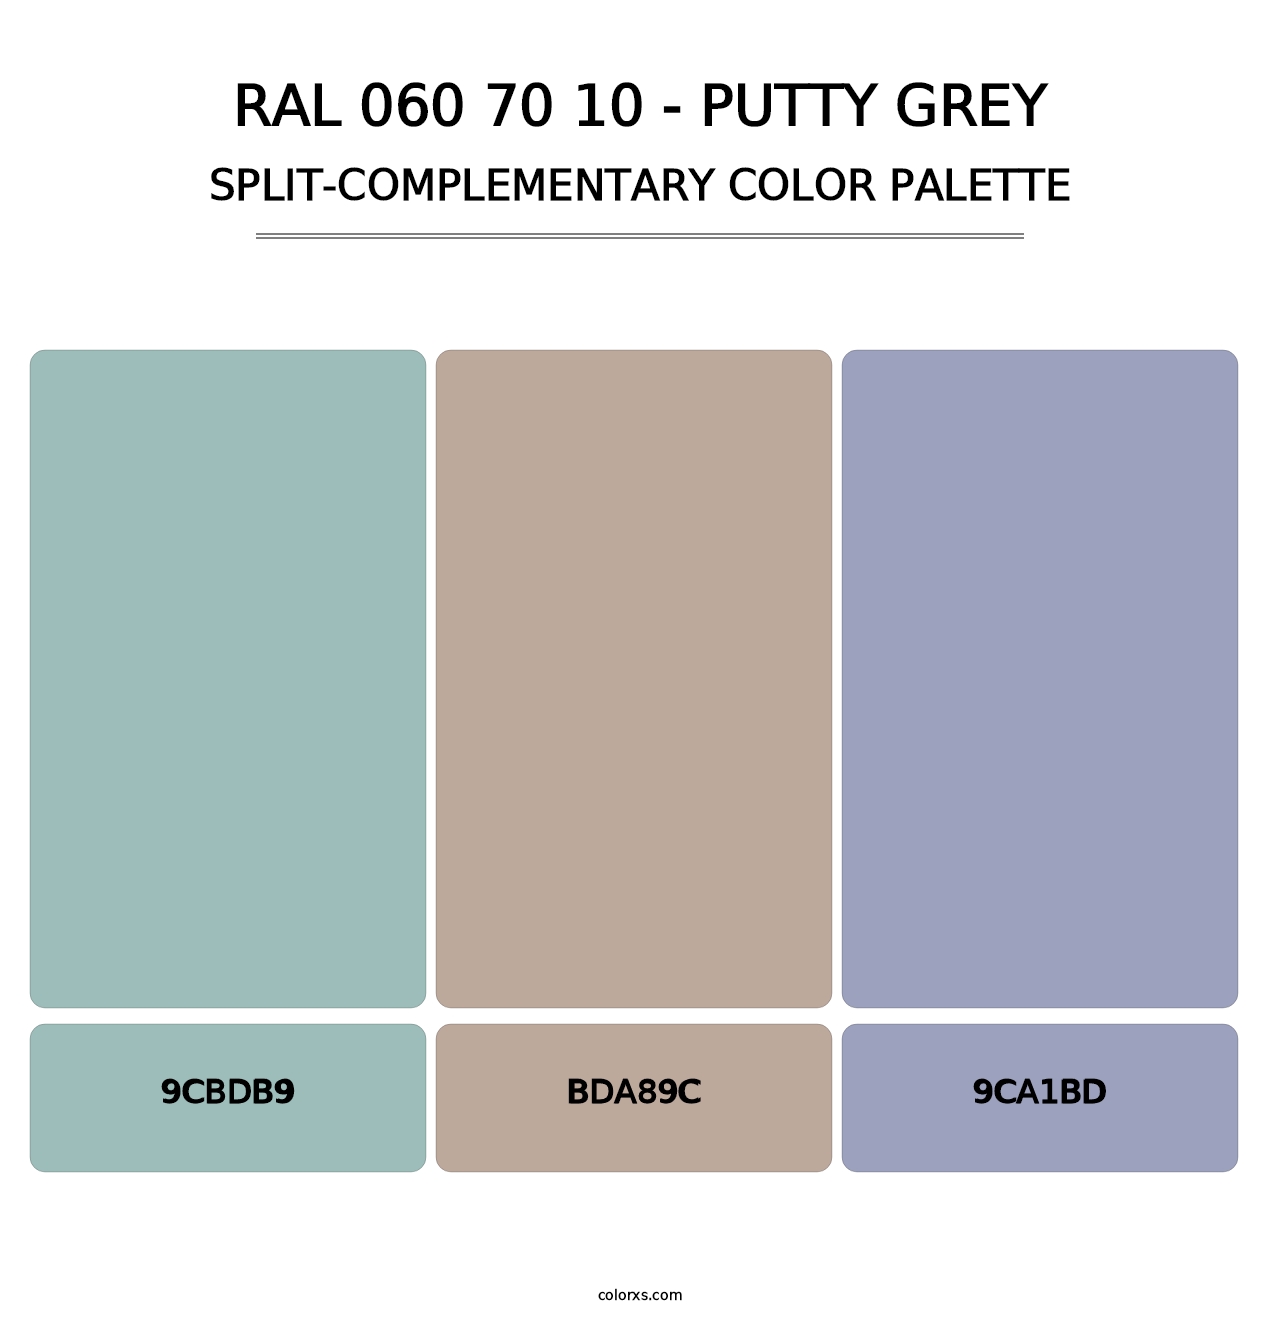 RAL 060 70 10 - Putty Grey - Split-Complementary Color Palette